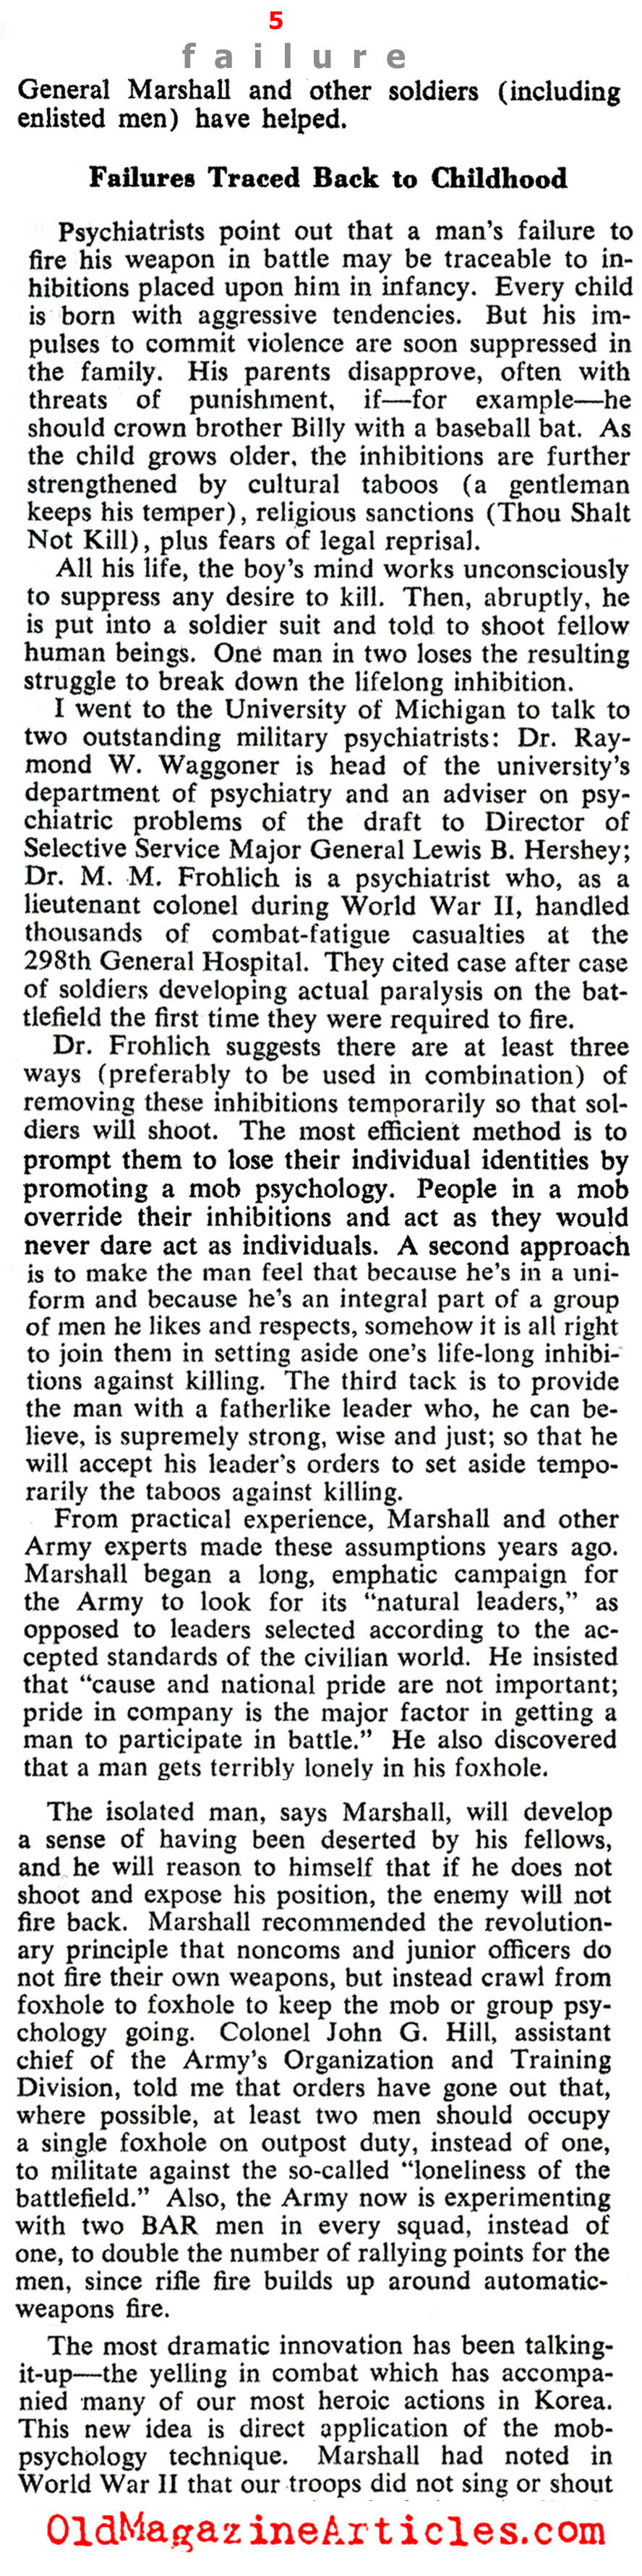 Why Only Half Our Soldiers Fire Their Rifles (Collier's Magazine, 1952)